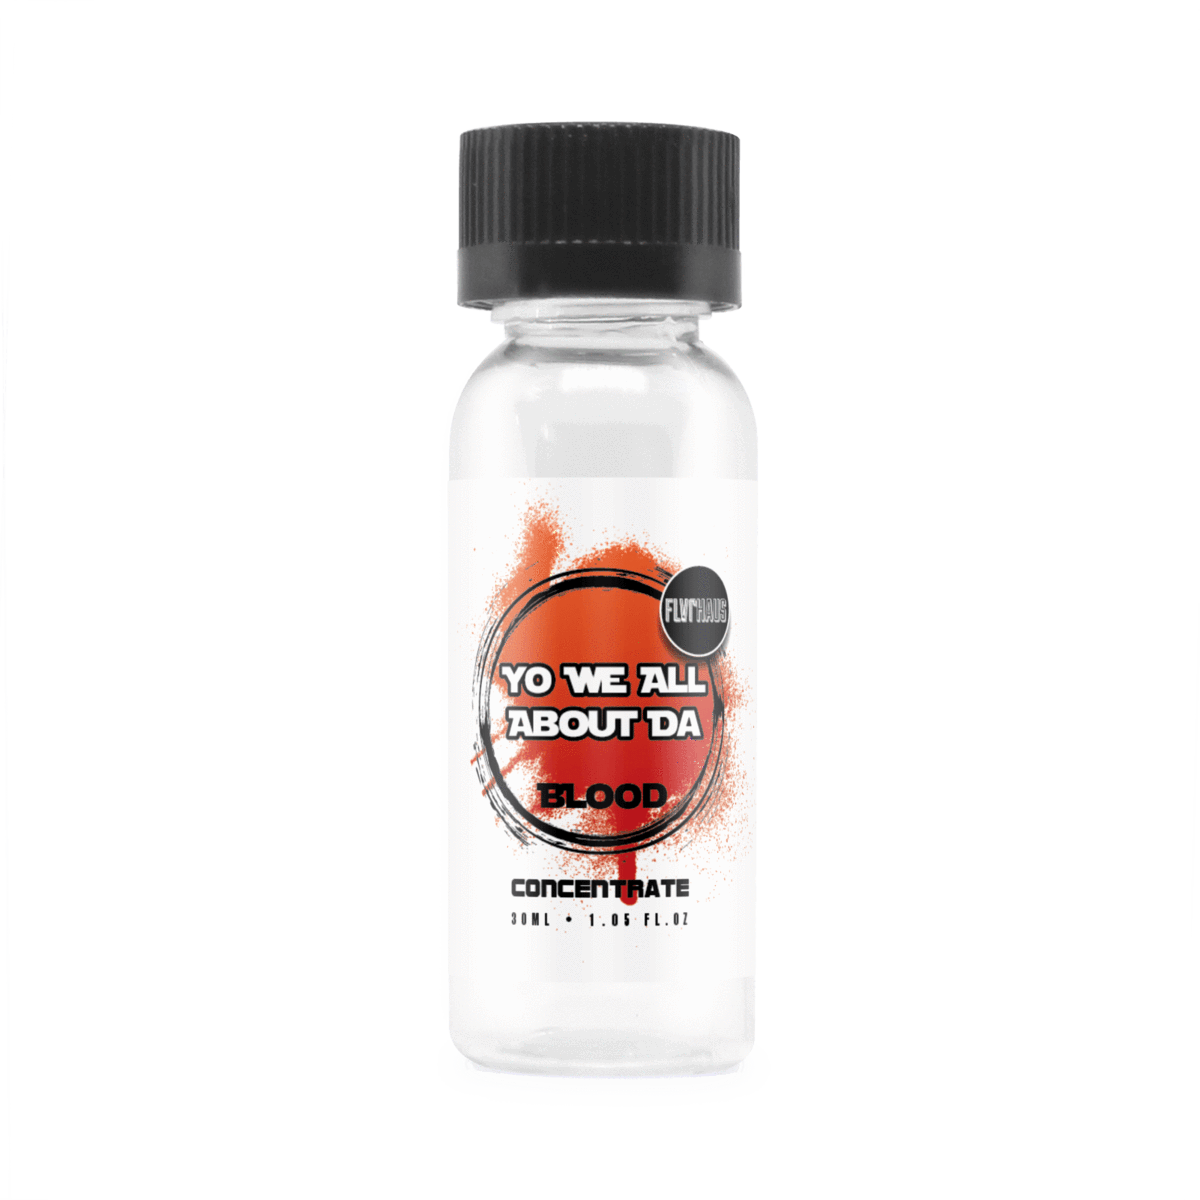 Yoda Blood Concentrate E-Liquid by Taov Cloud Chasers 30ml